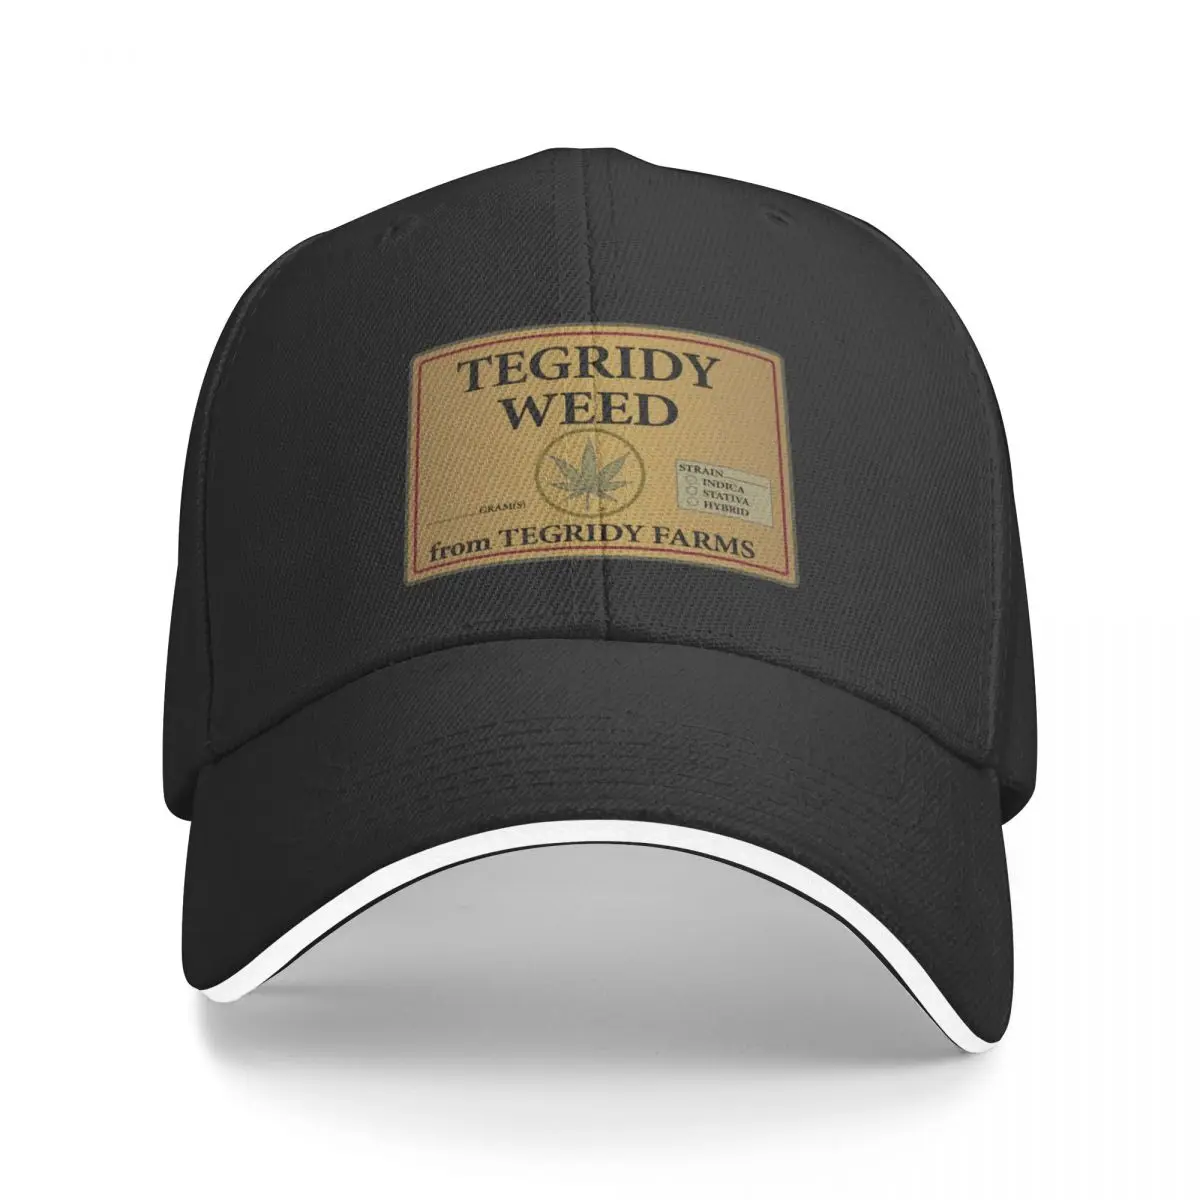 

New Tegridy Weed From Tegridy Farms Baseball Cap Fishing Hat Sun Hat For Children Golf Hat Men Women'S